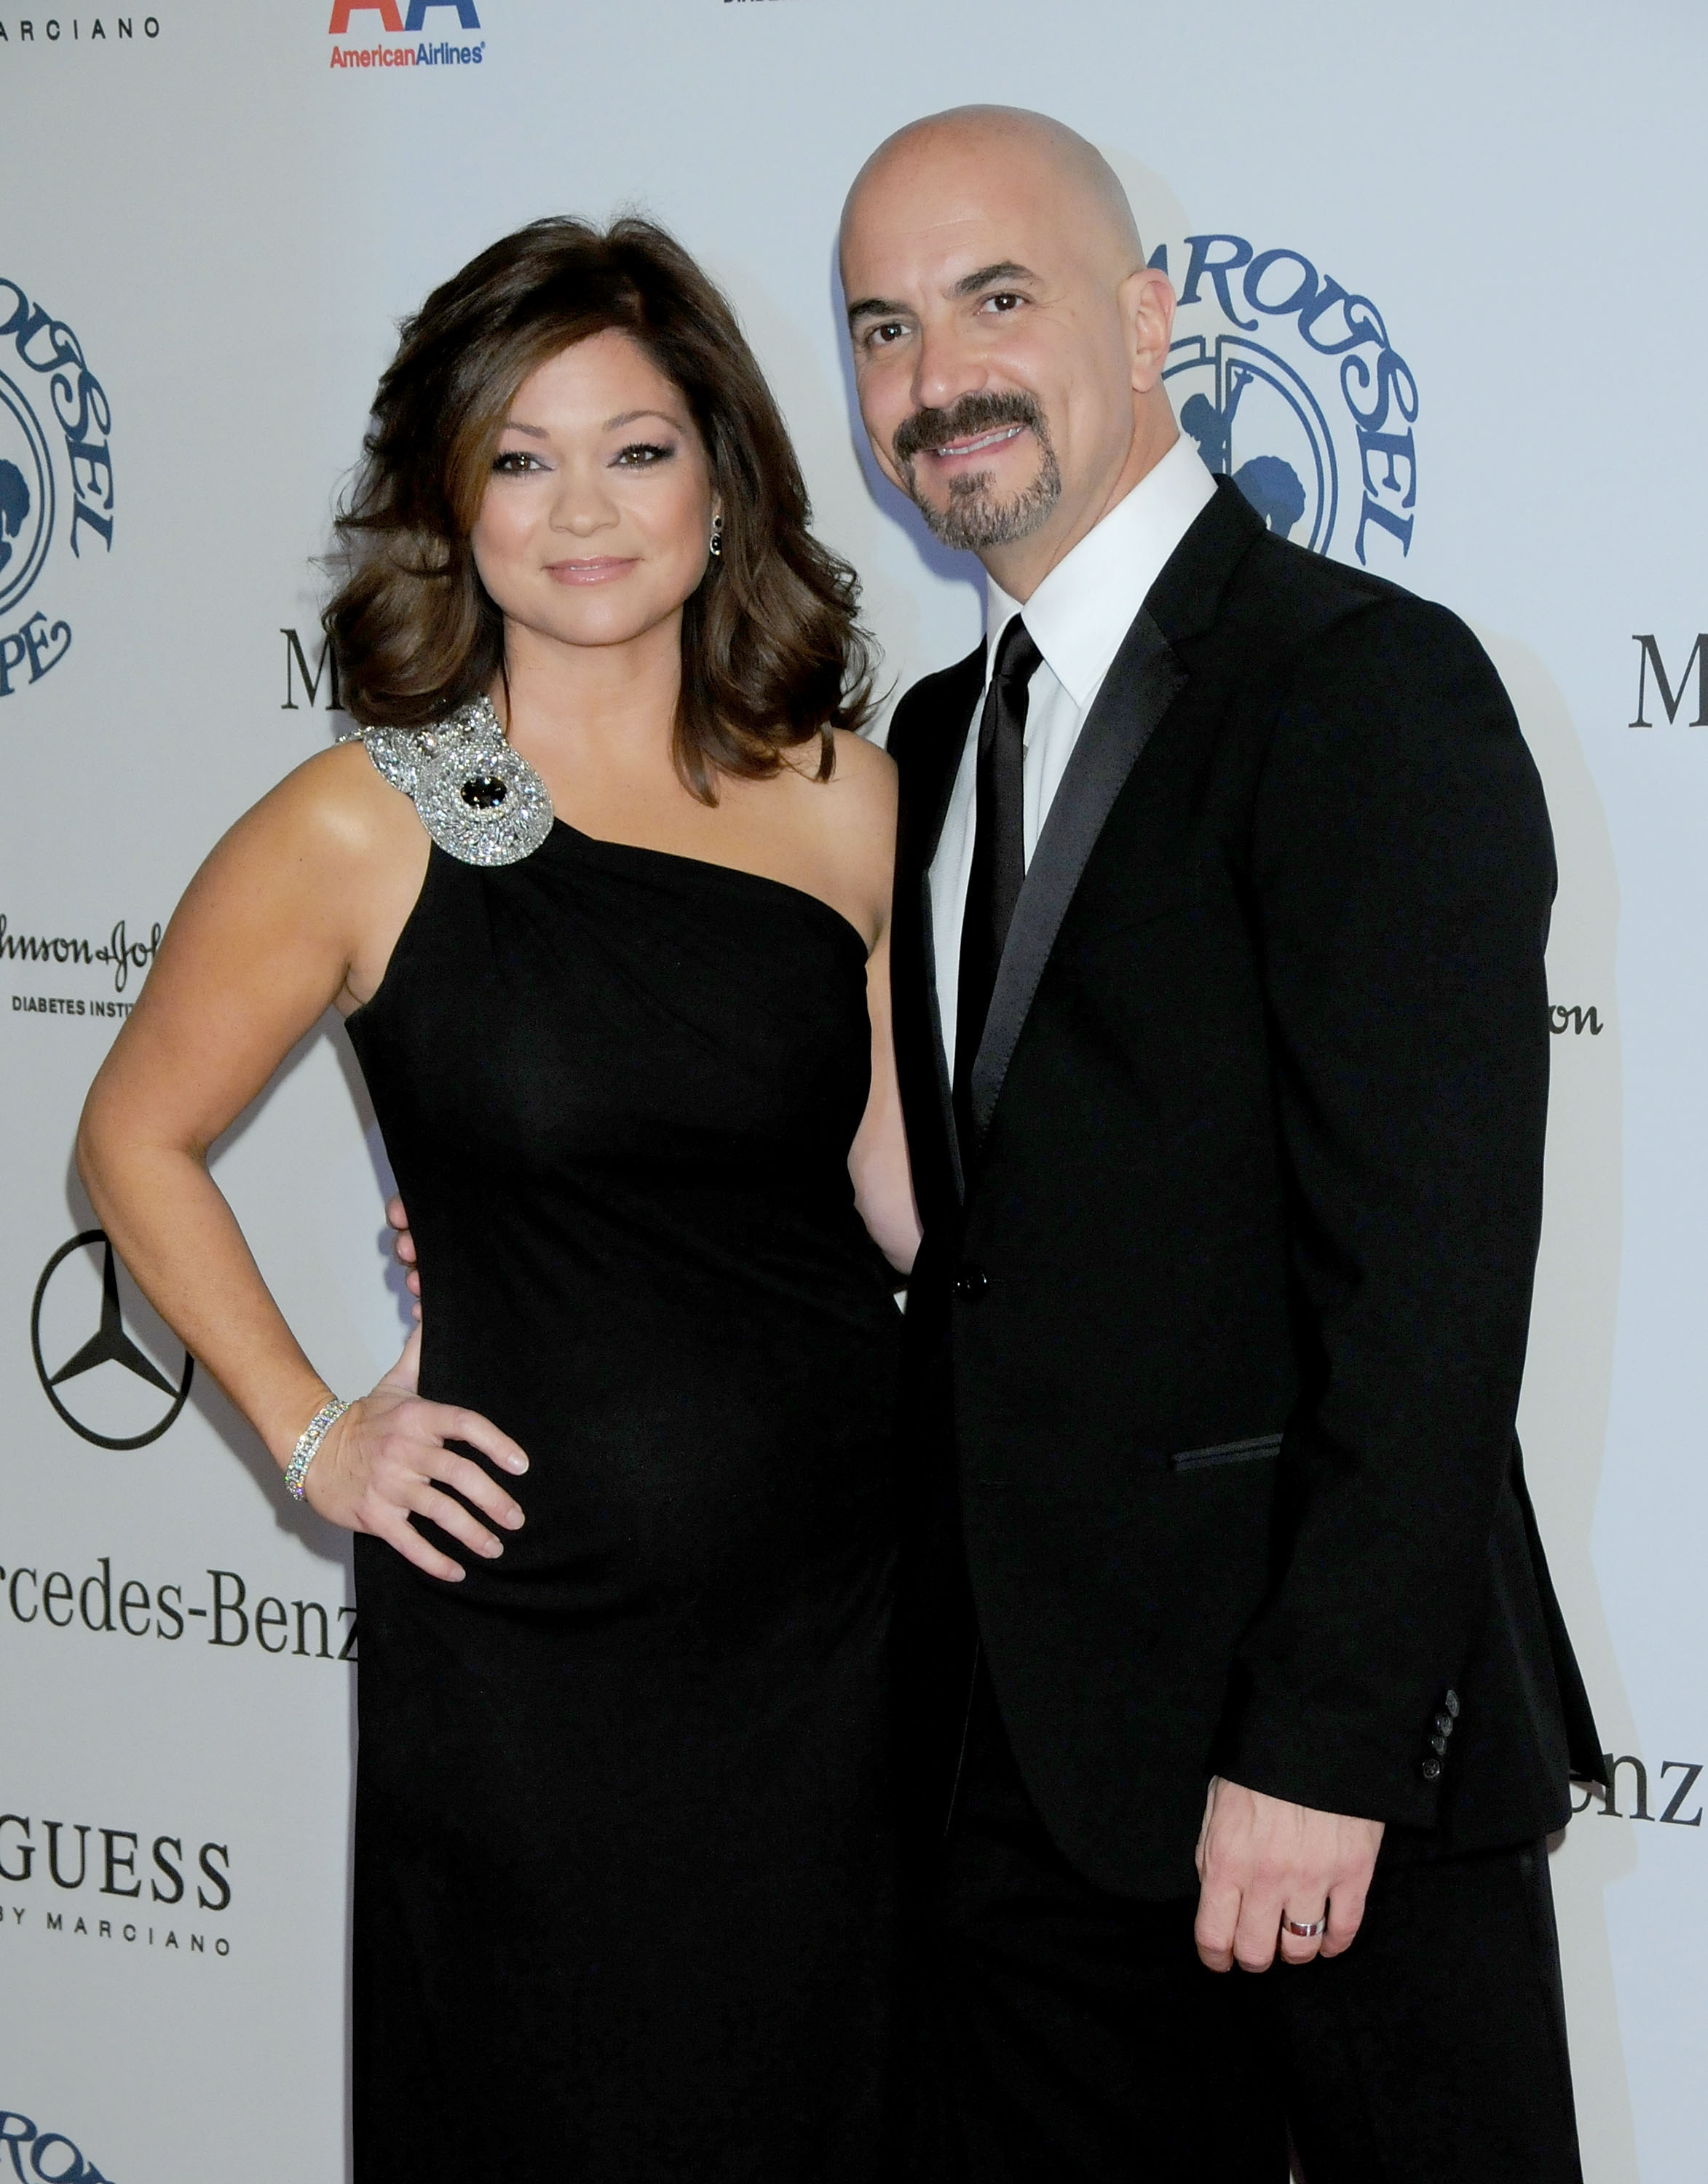 Actress Valerie Bertinelli and Tom Vitale pictured upon arrival at The 30th Anniversary Carousel Of Hope Ball at The Beverly Hilton Hotel on October 25, 2008 in Beverly Hills, California. / Source: Getty Images